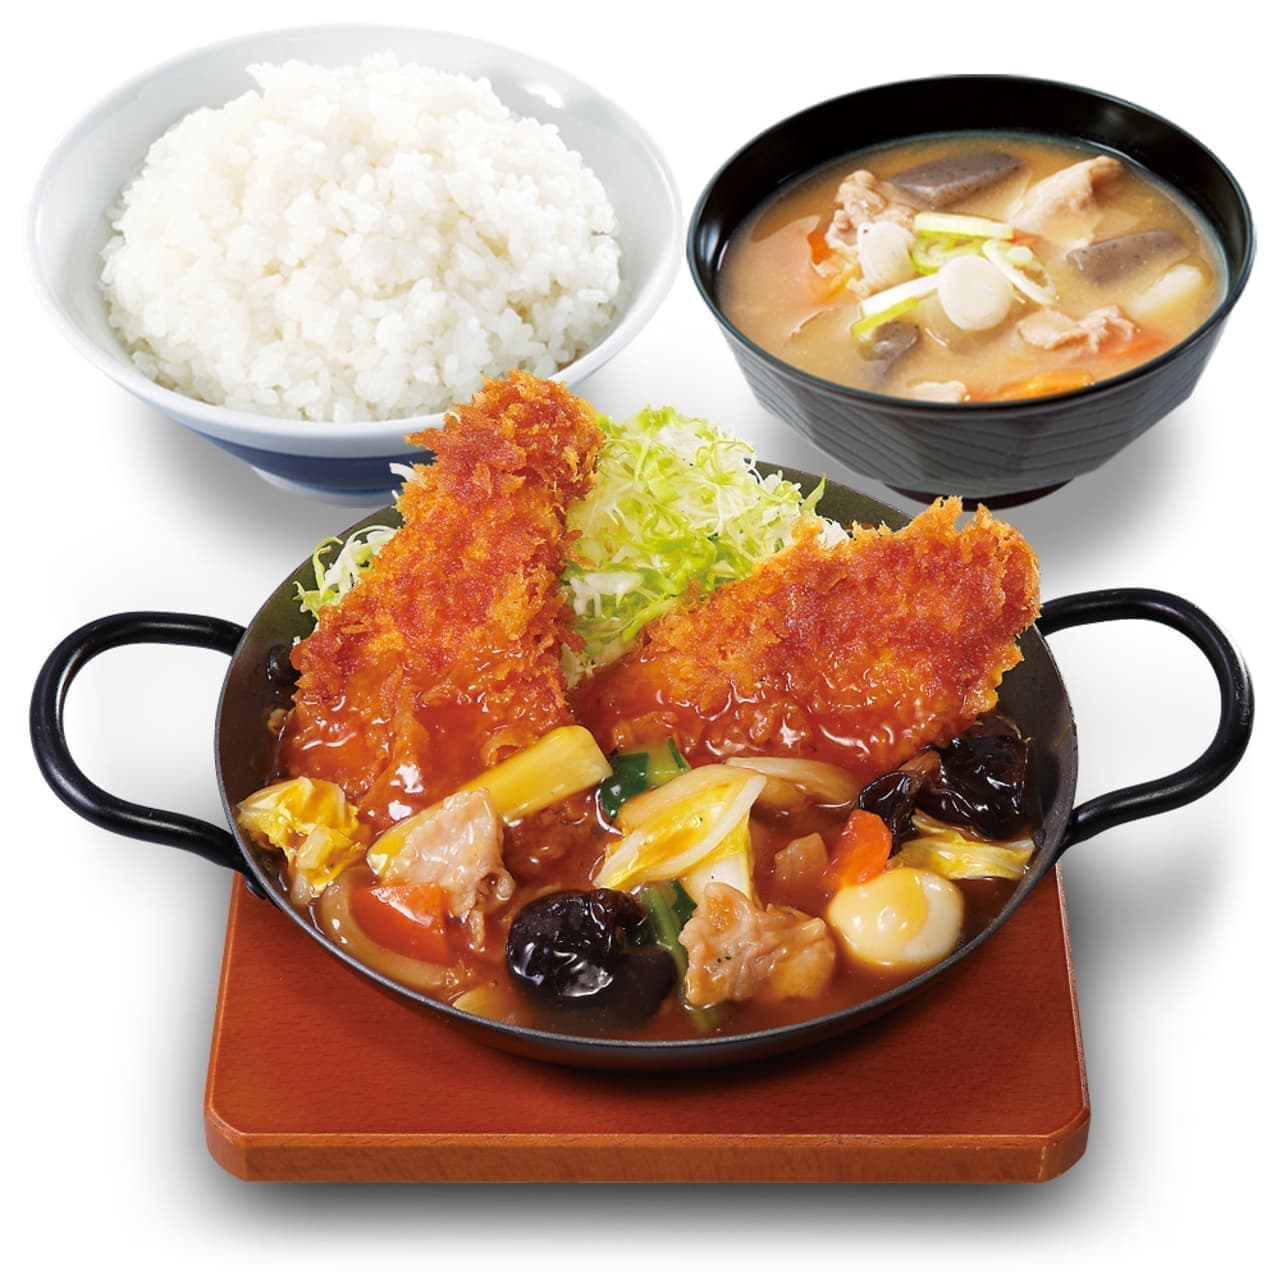 Katsuya "Mixed set meal of tare-katsu and umani (fried pork cutlet and fried fish stew)" (Japanese only)